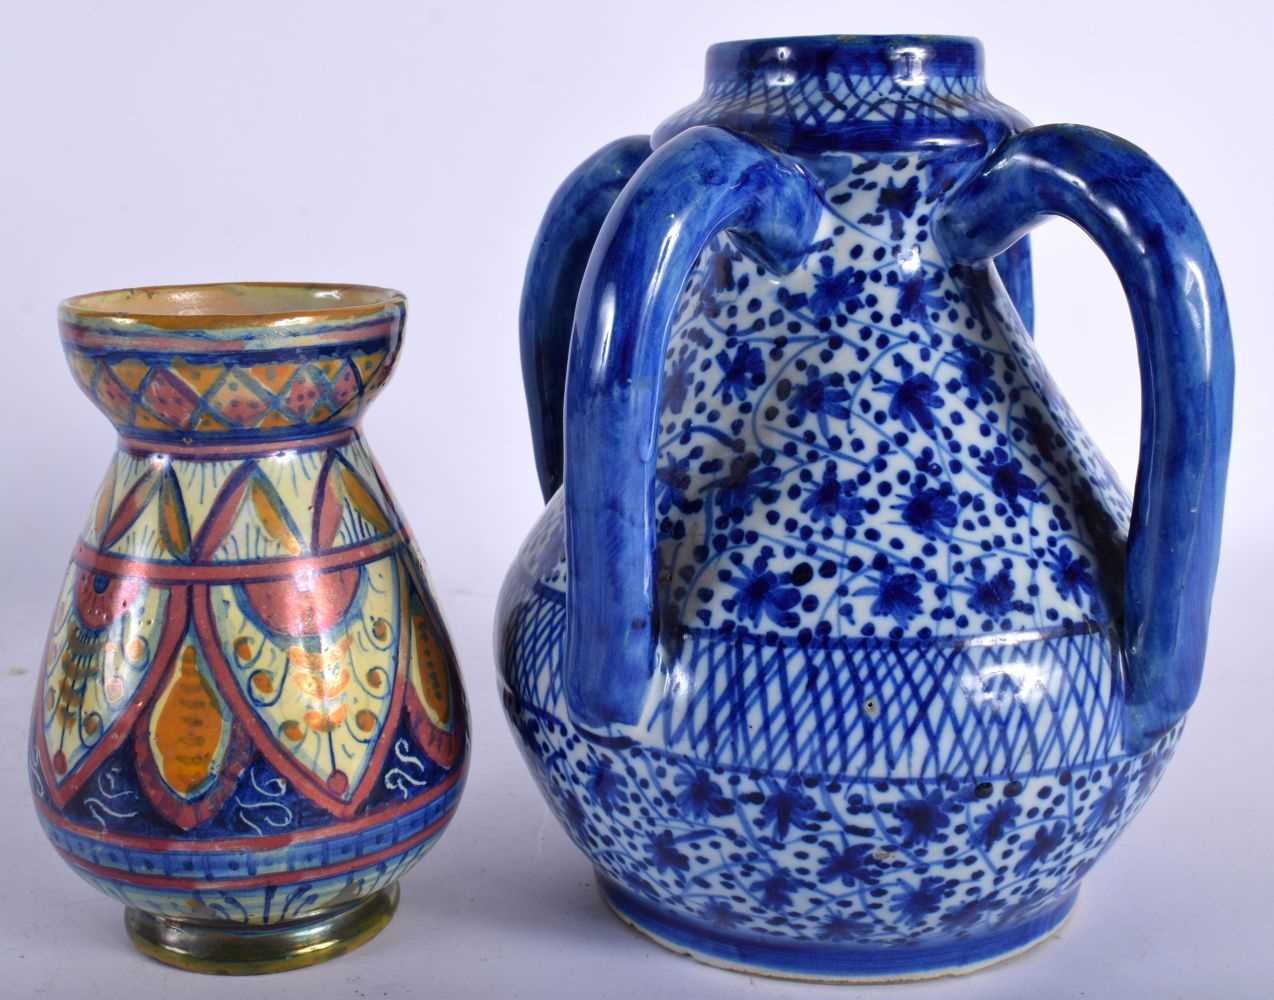 A SMALL ANTIQUE HISPANO MORESQUE TYPE LUSTRE VASE together with a delft faience four handled vase. - Image 2 of 4